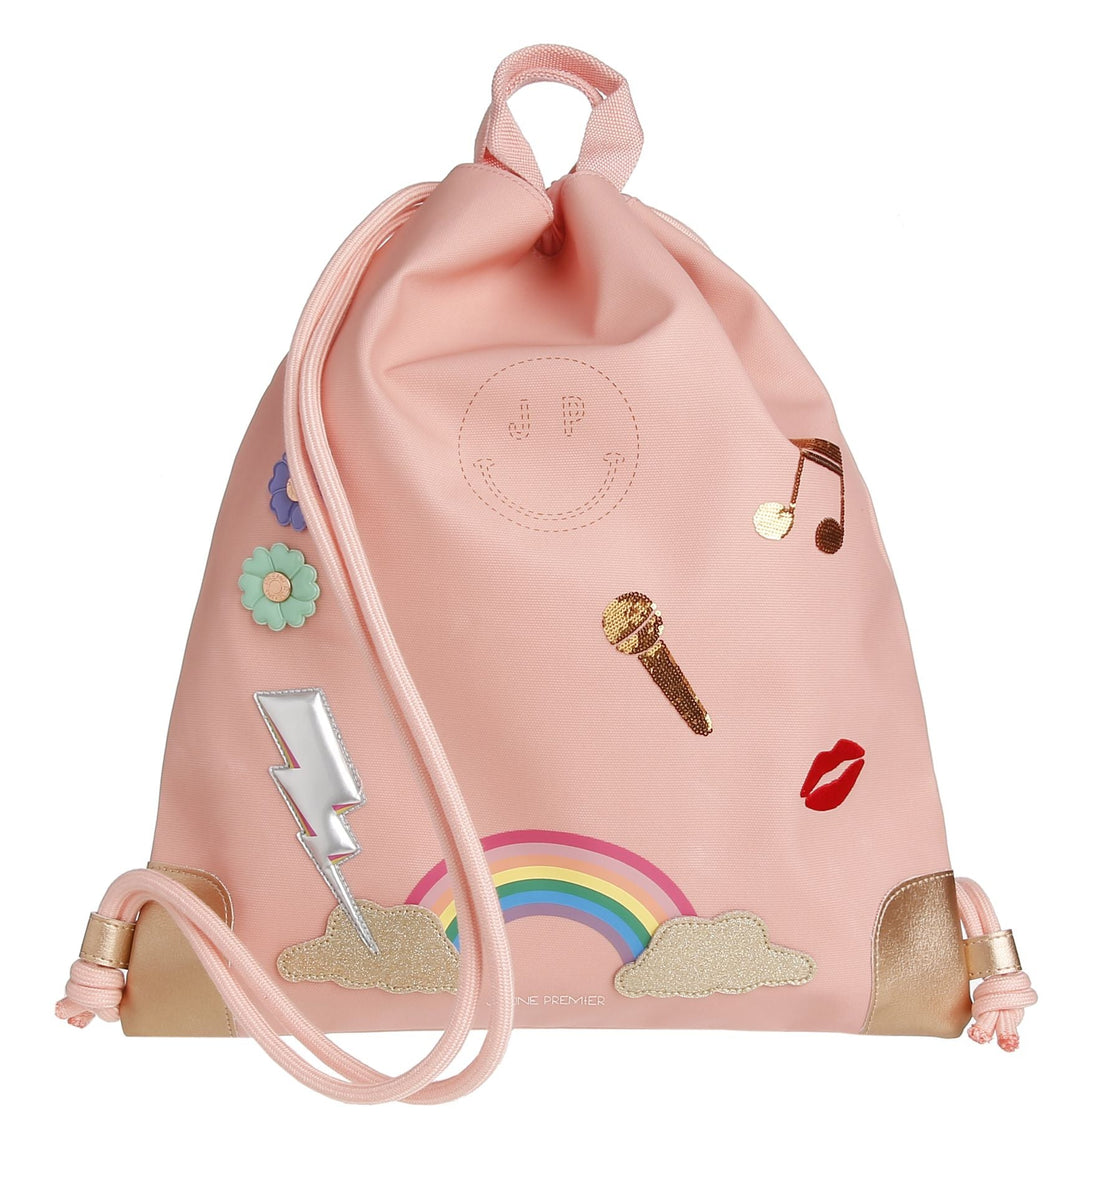 The multifunctional Jeune Premier "Lady Gadget Pink" City Bag can be used as a swimming bag, sports bag or fashion accessory, for any age and any occasion!